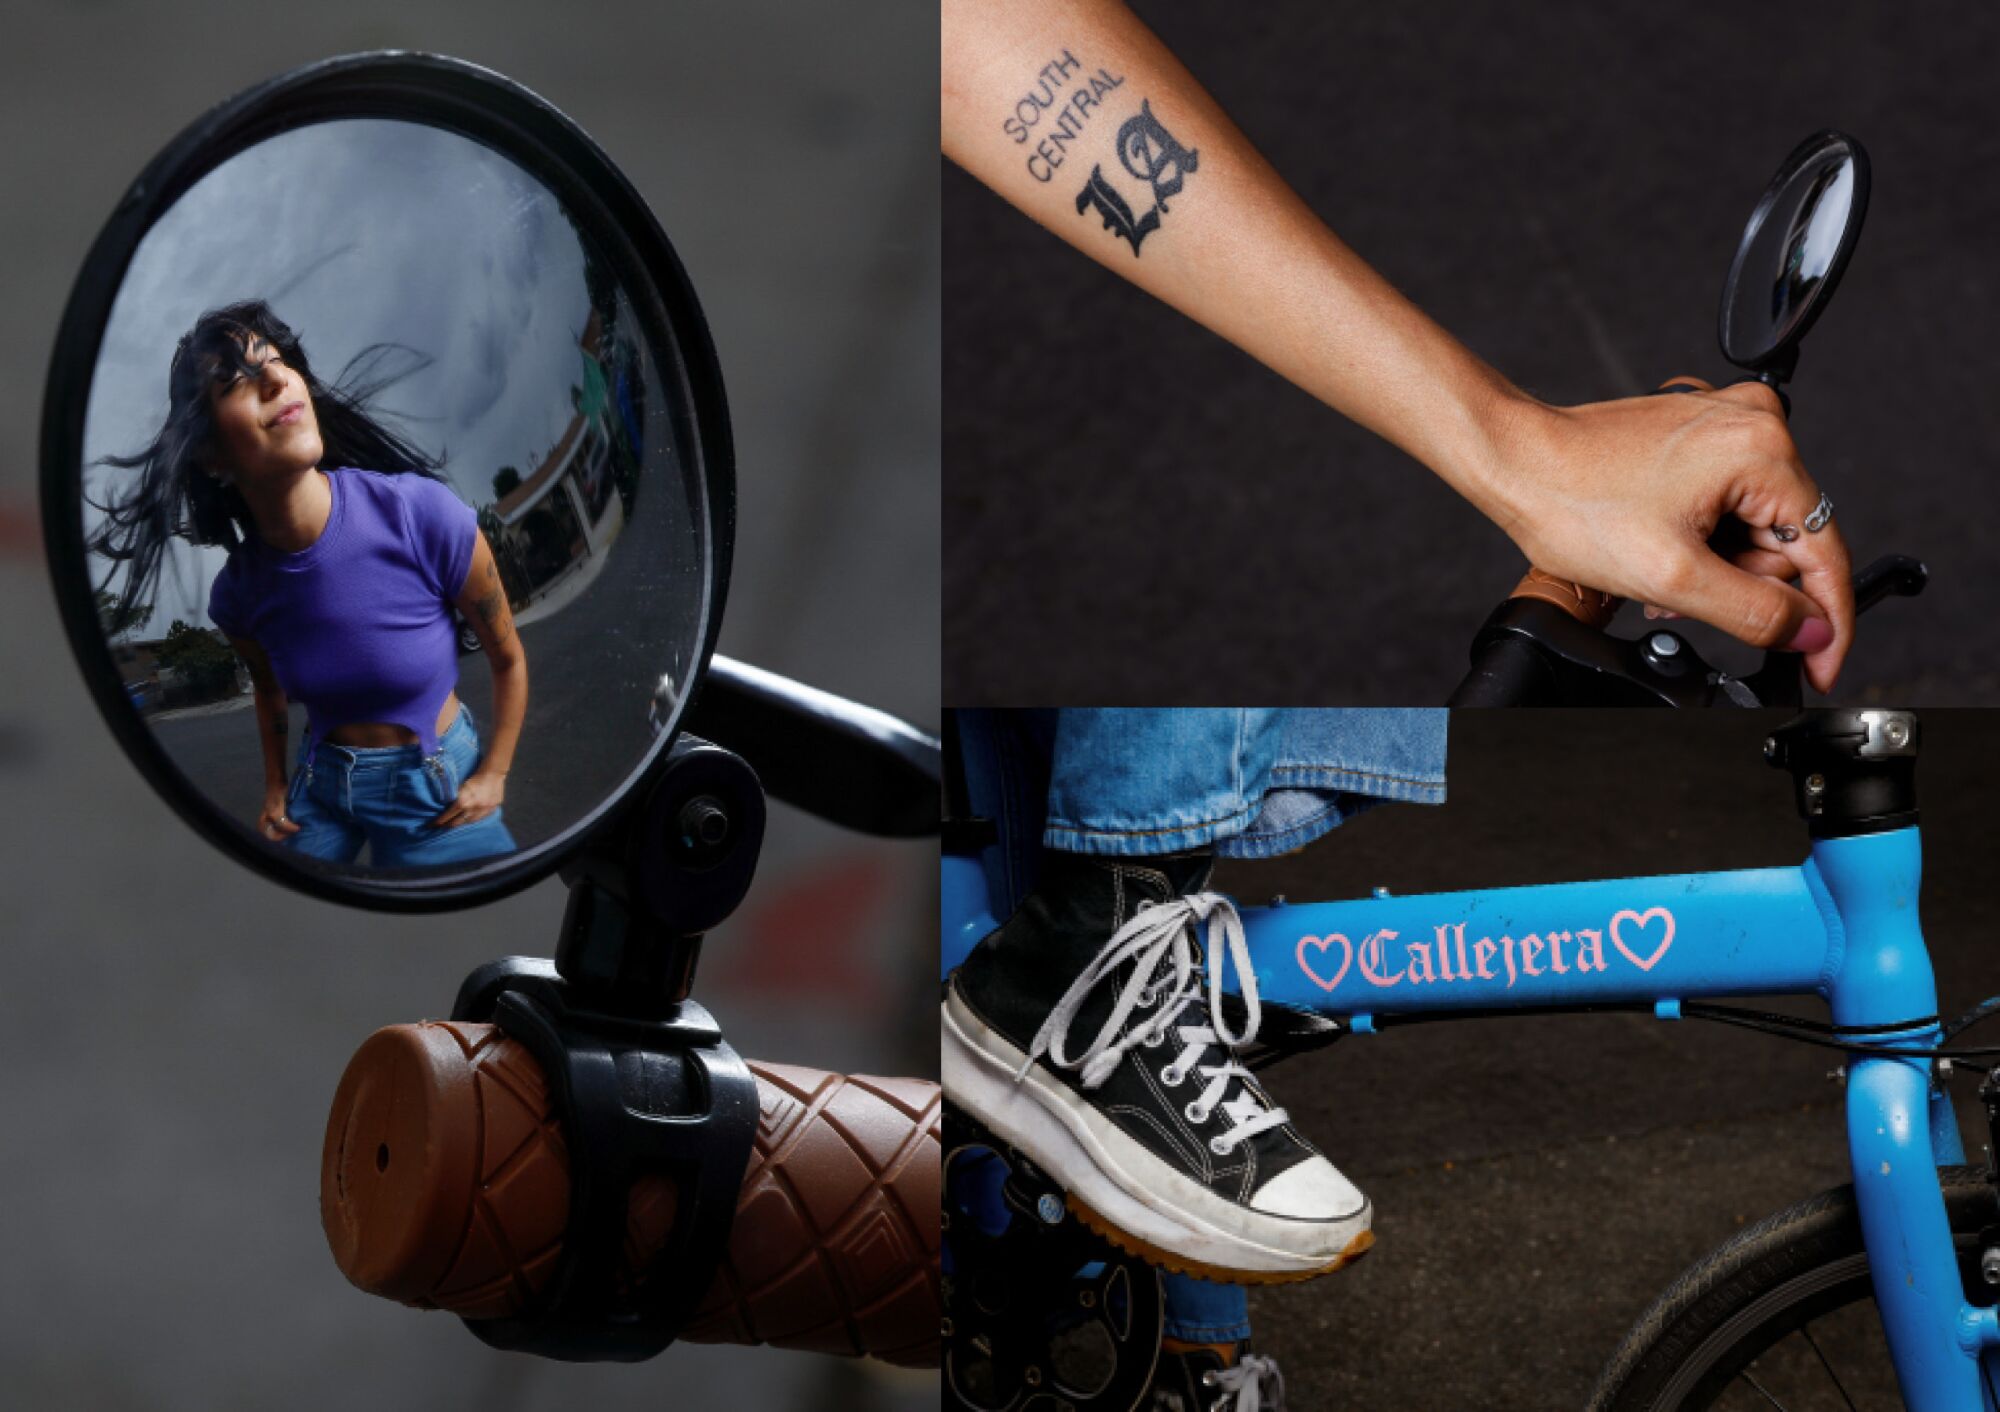 Three photos were arranged of Michelle Morrow together, her tattoo on her arm and her sneaker leg on the pedals of her bike.